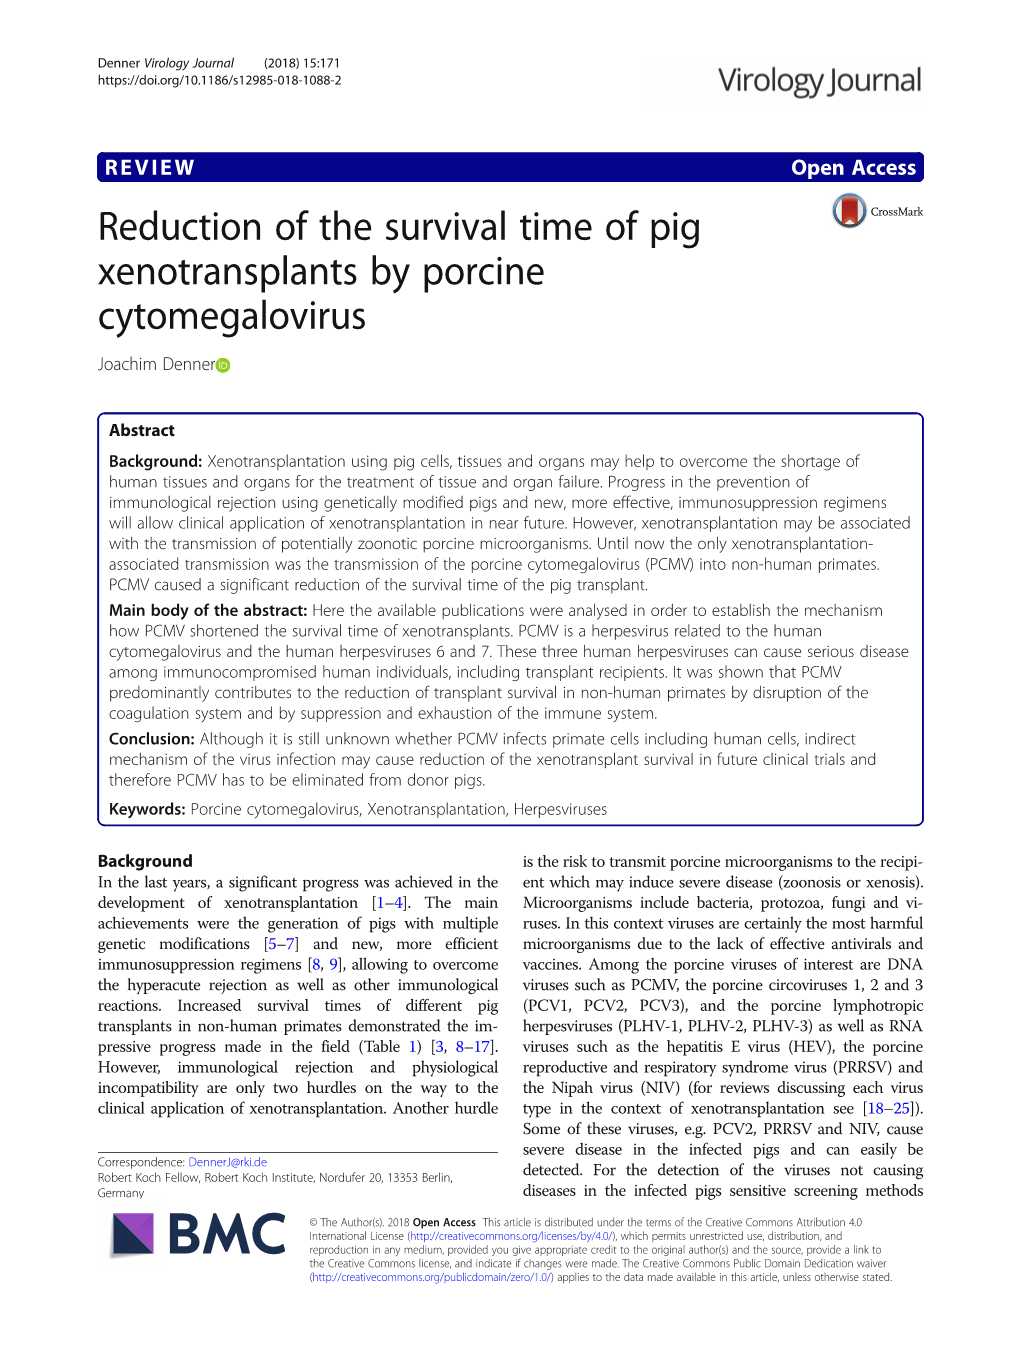 Reduction of the Survival Time of Pig Xenotransplants by Porcine Cytomegalovirus Joachim Denner